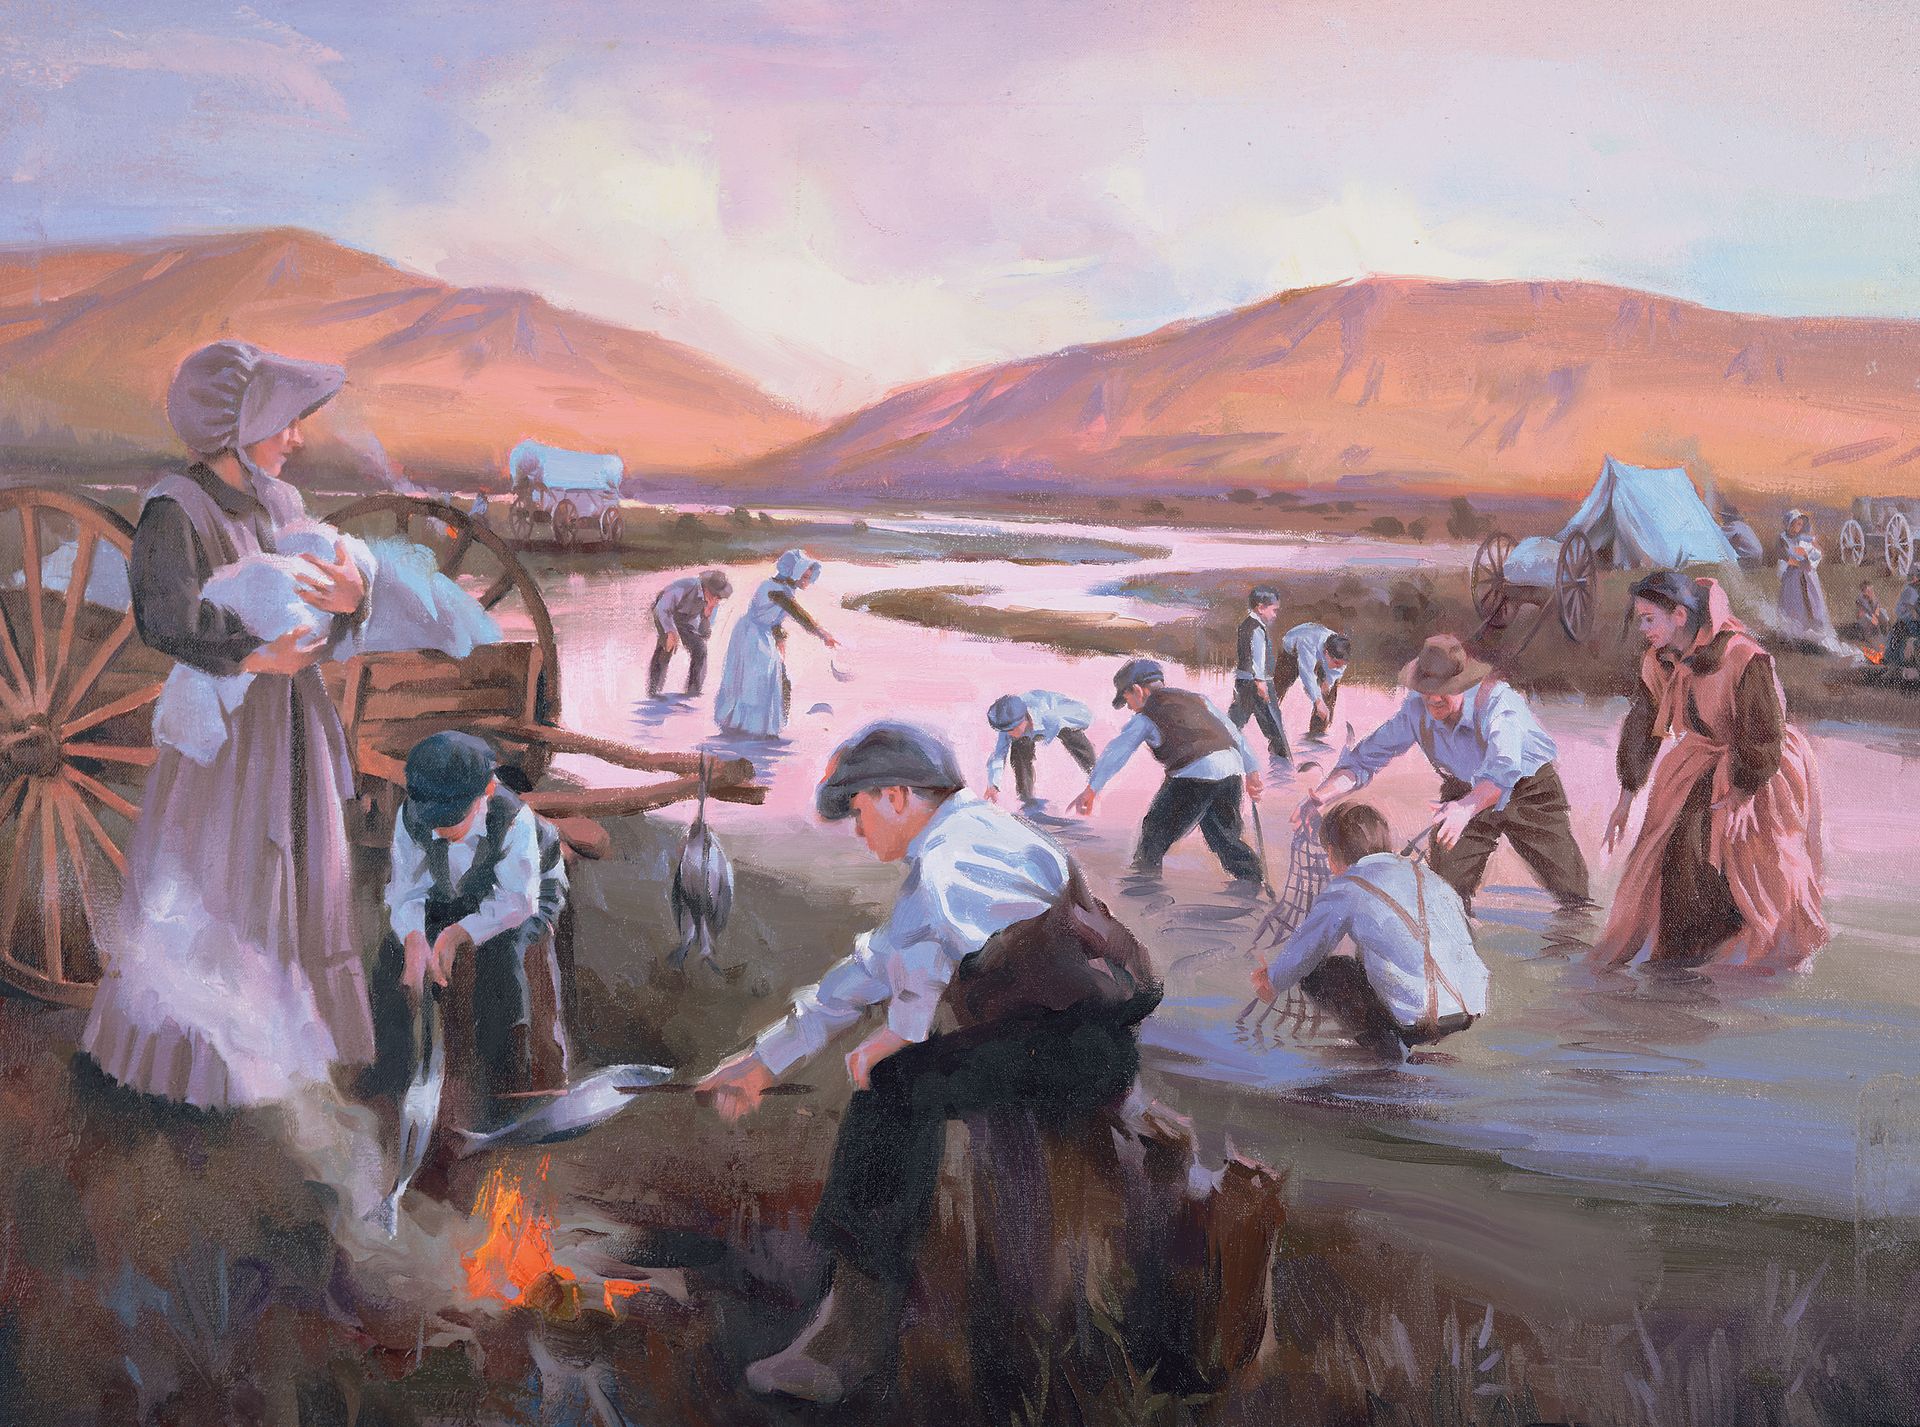 Pioneers Catching Fish, by Sam Lawlor